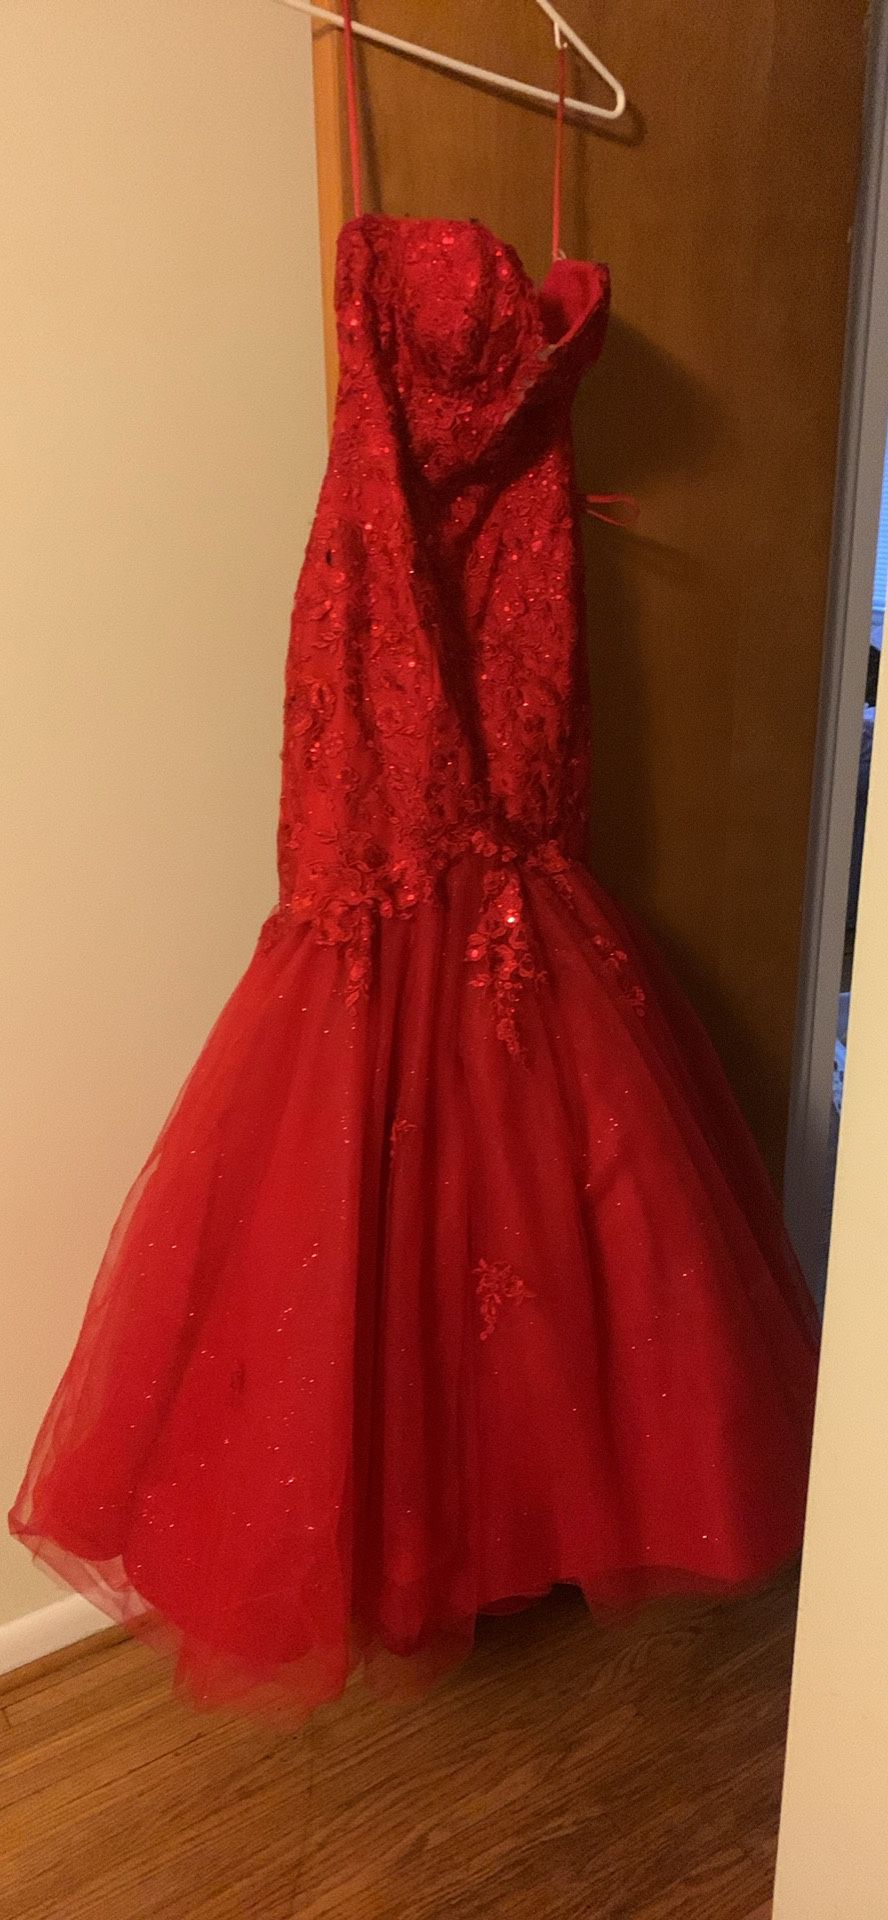 Red Prom Dress For Sale!